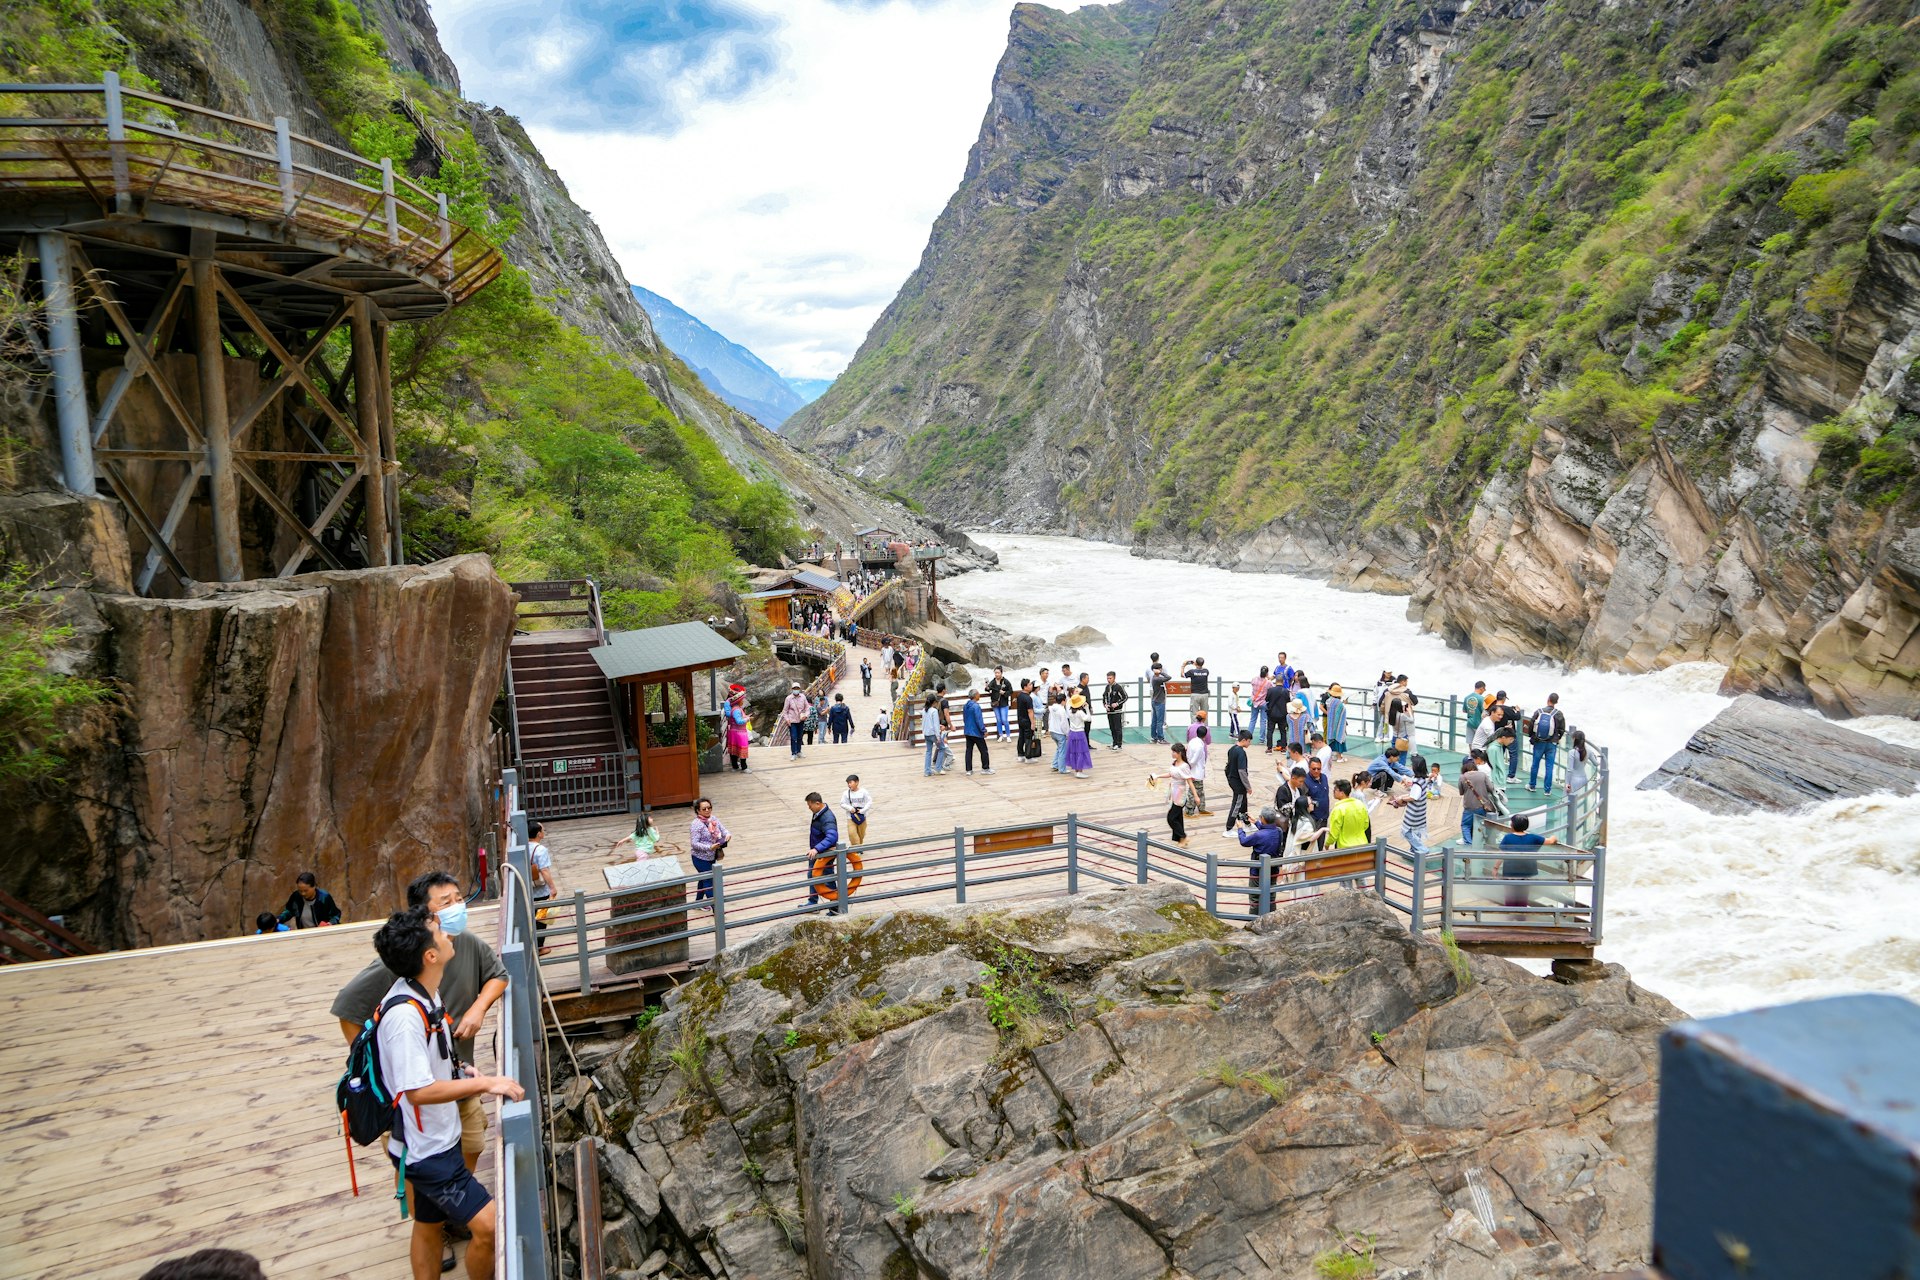 Tourists on a viewing platform at Tiger Leaping Gorge, Yunnan